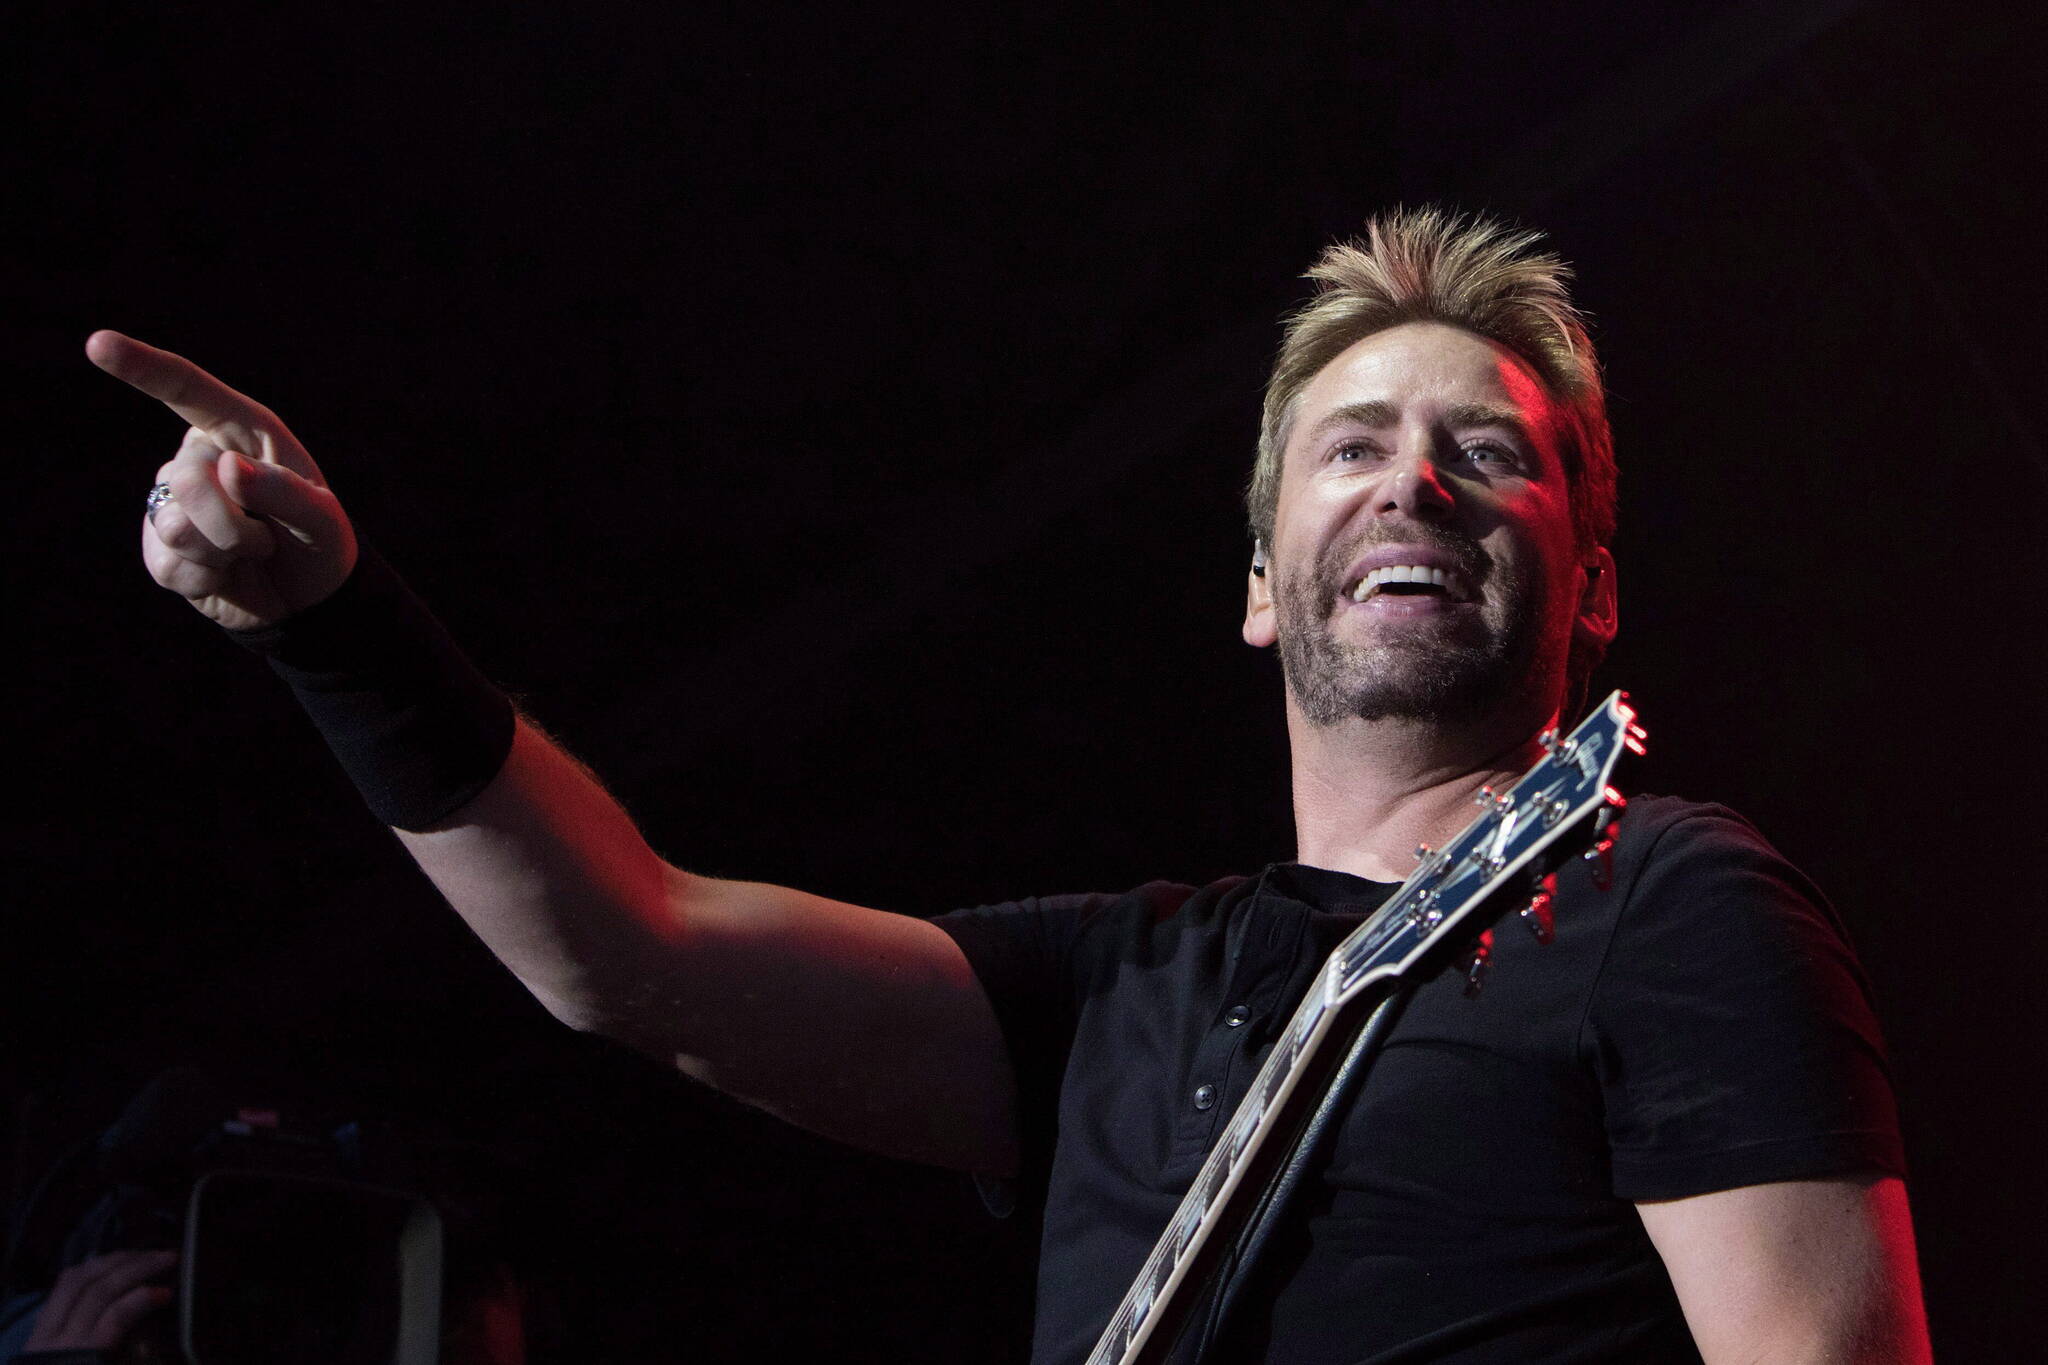 Nickelback is paying tribute to the late Charlie Daniels with an explosive cover of his country classic “The Devil Went Down To Georgia.” Nickelback performs during Fire Aid for Fort McMurray in Edmonton, Wednesday, June 29, 2016. THE CANADIAN PRESS/Amber Bracken